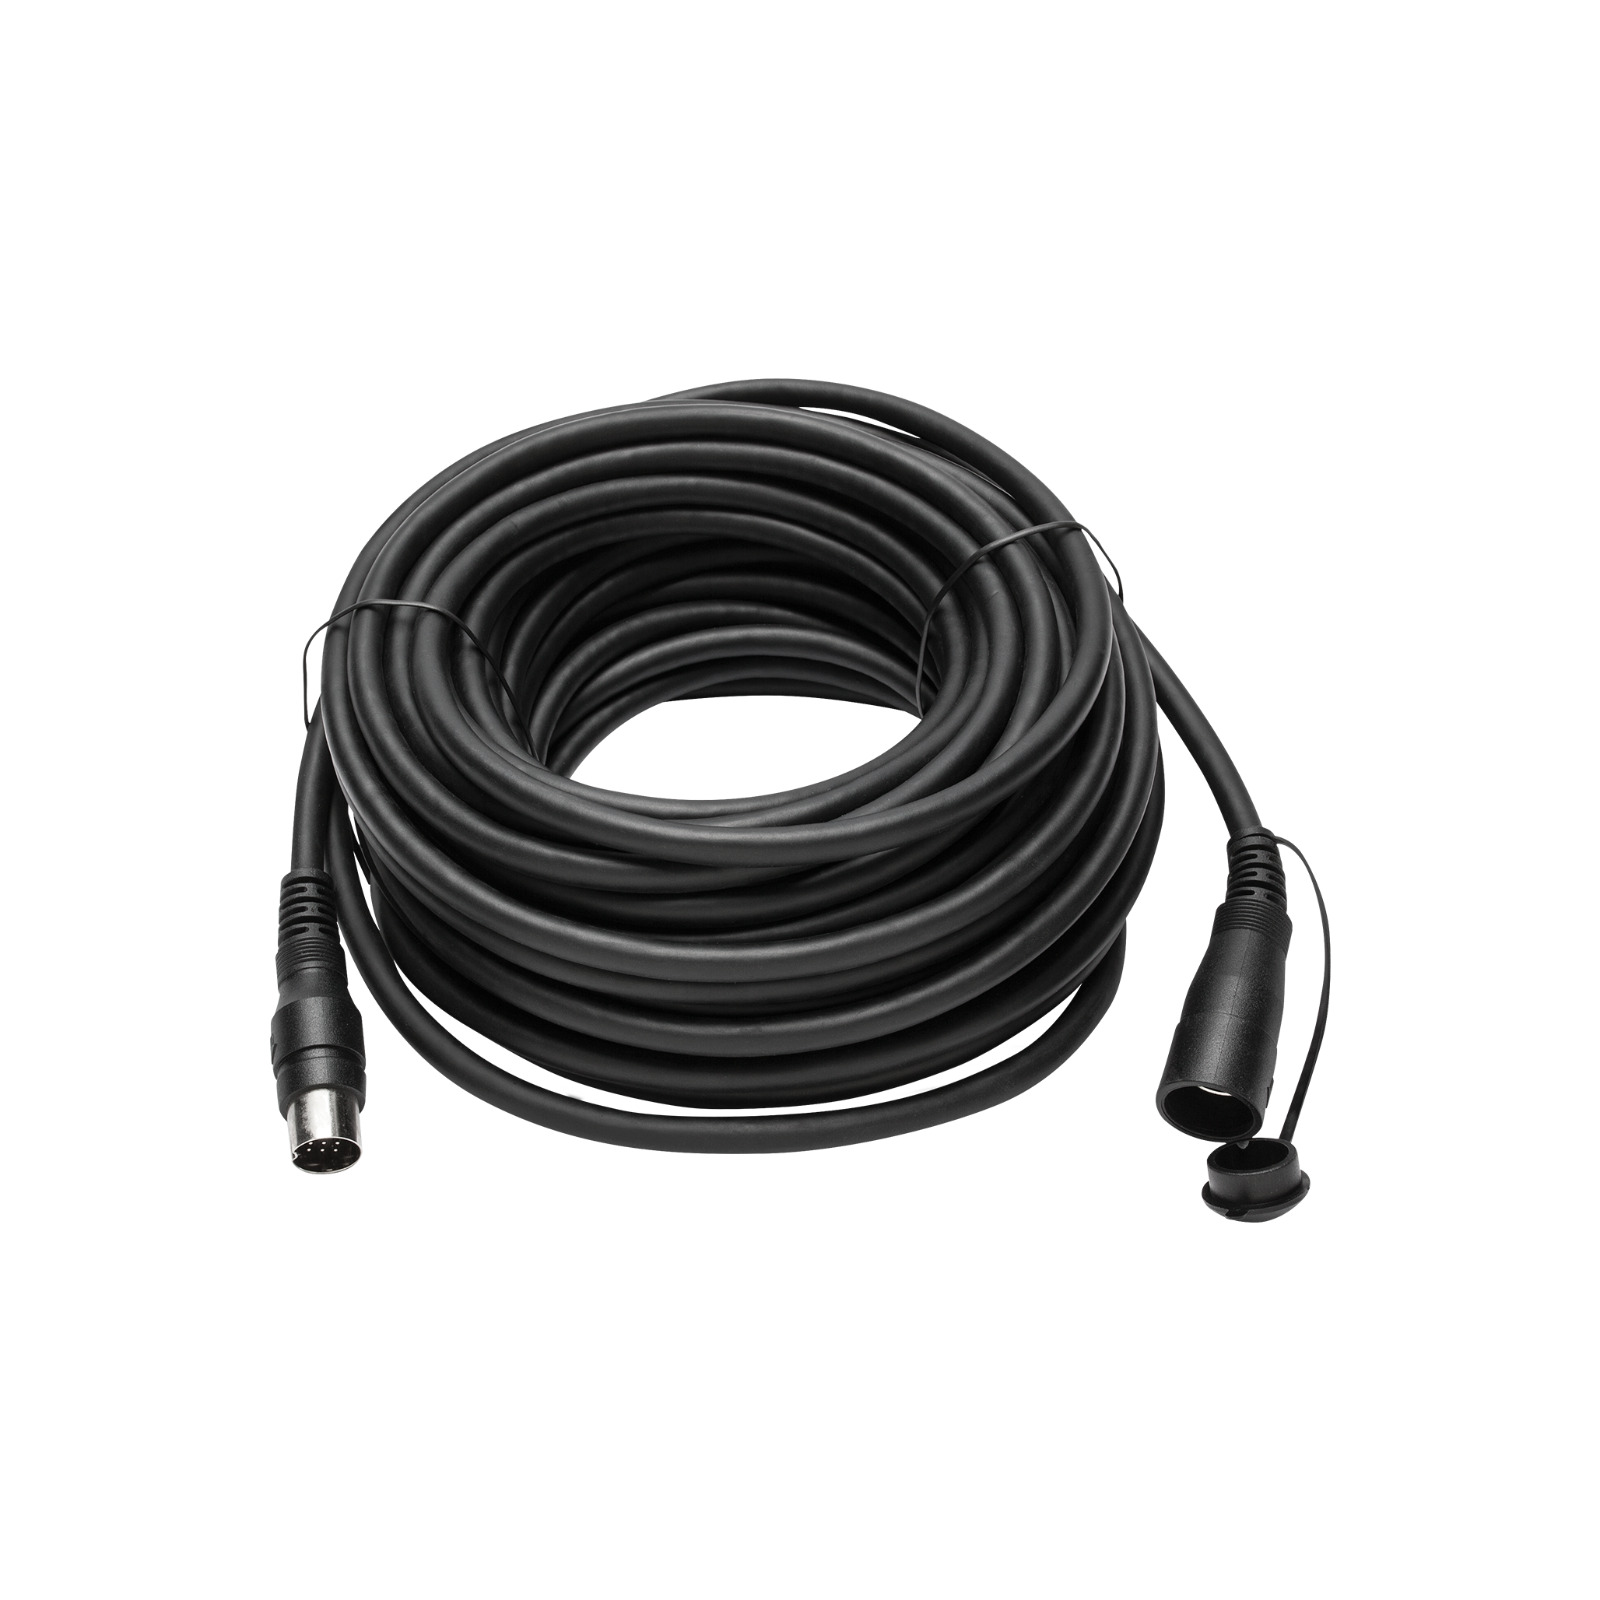 Punch Marine 25 Foot Extension Cable